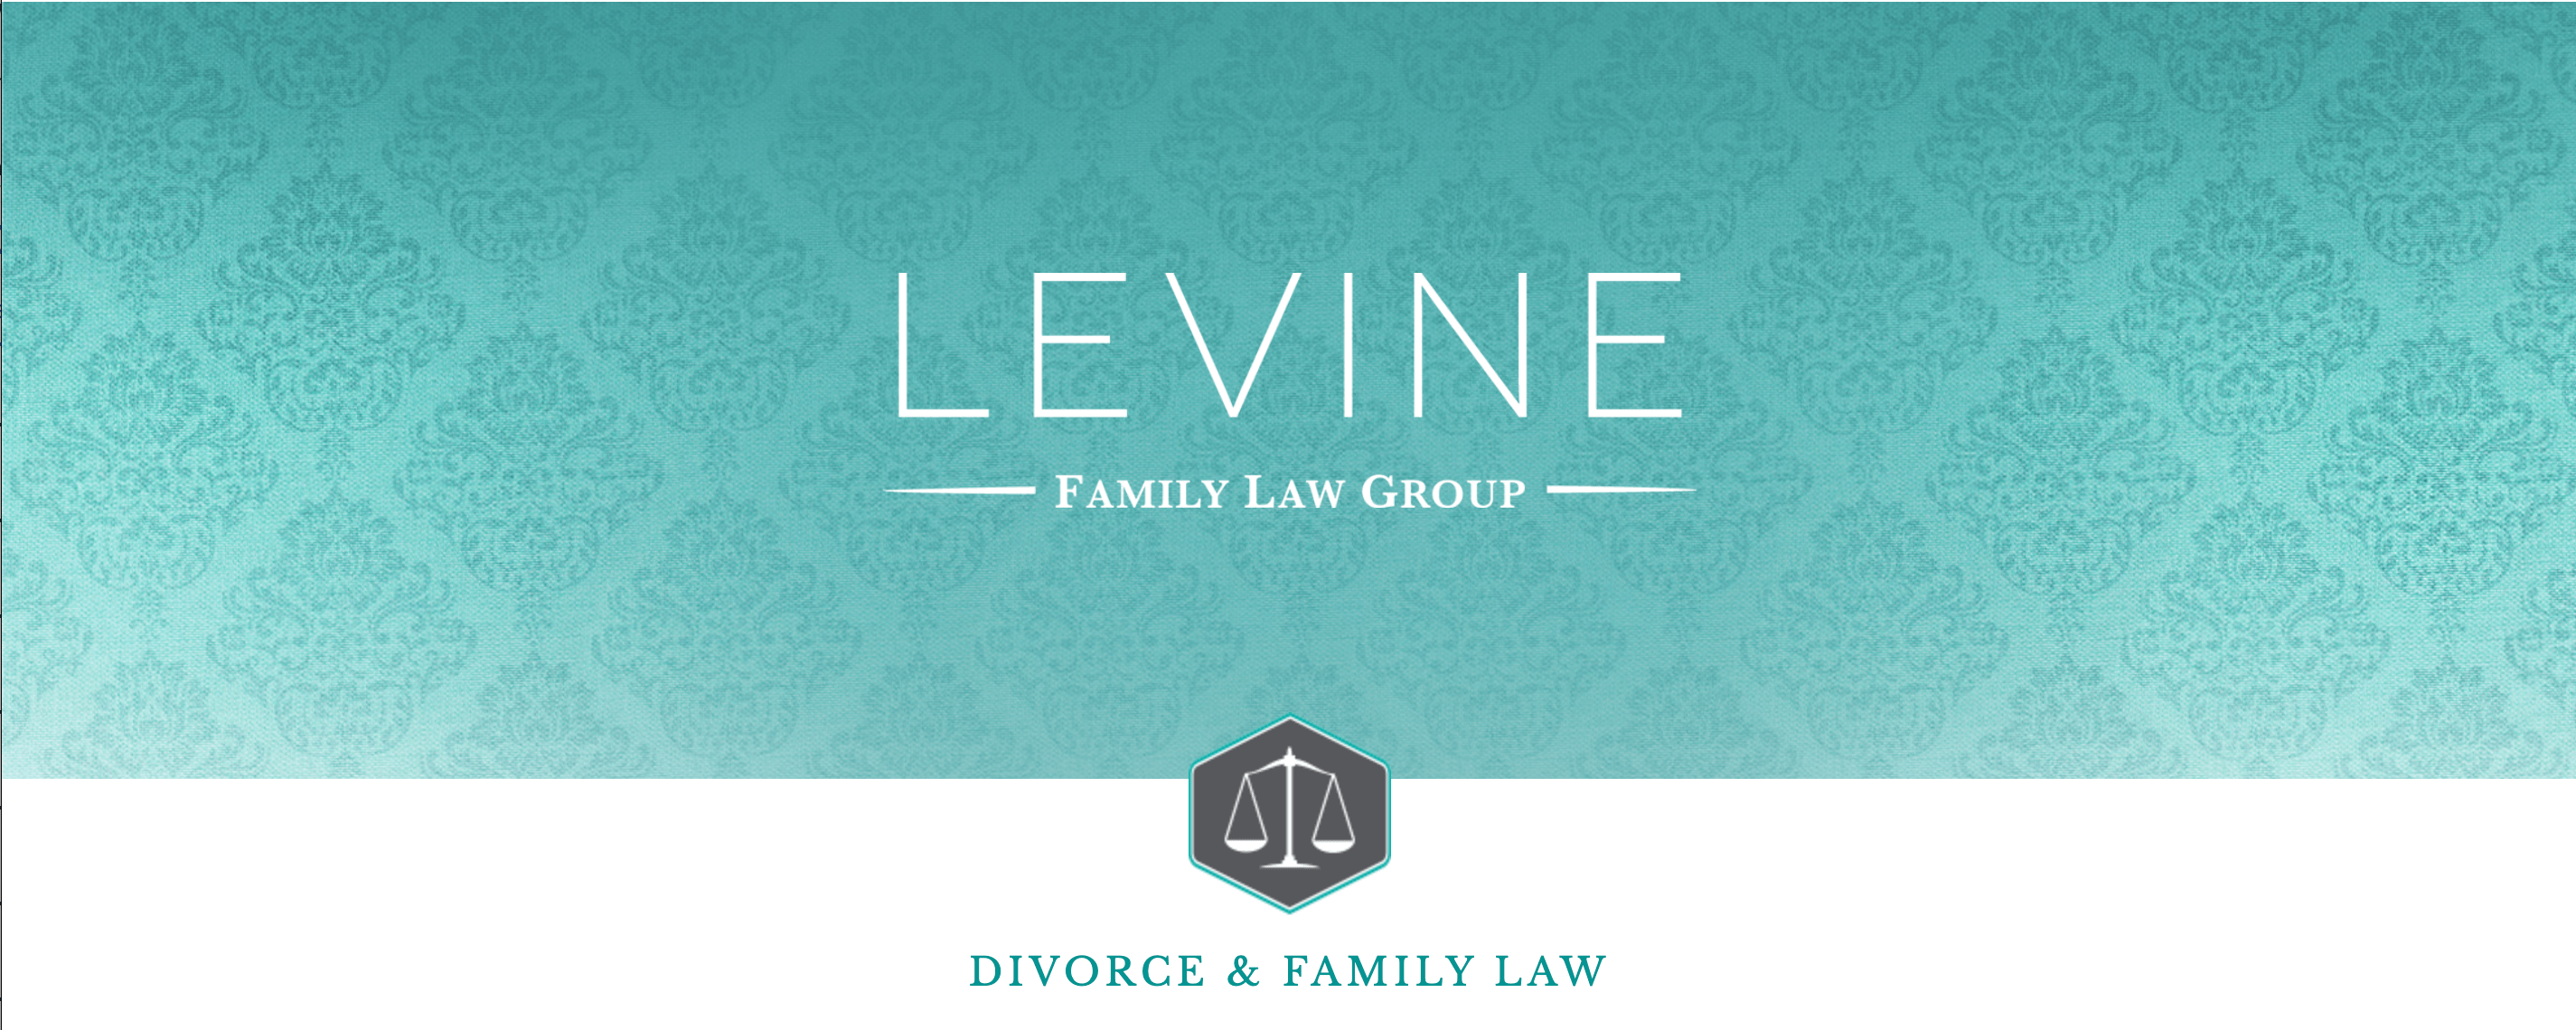 Levine Family Law Groups' website. The design is trendy and elegant.